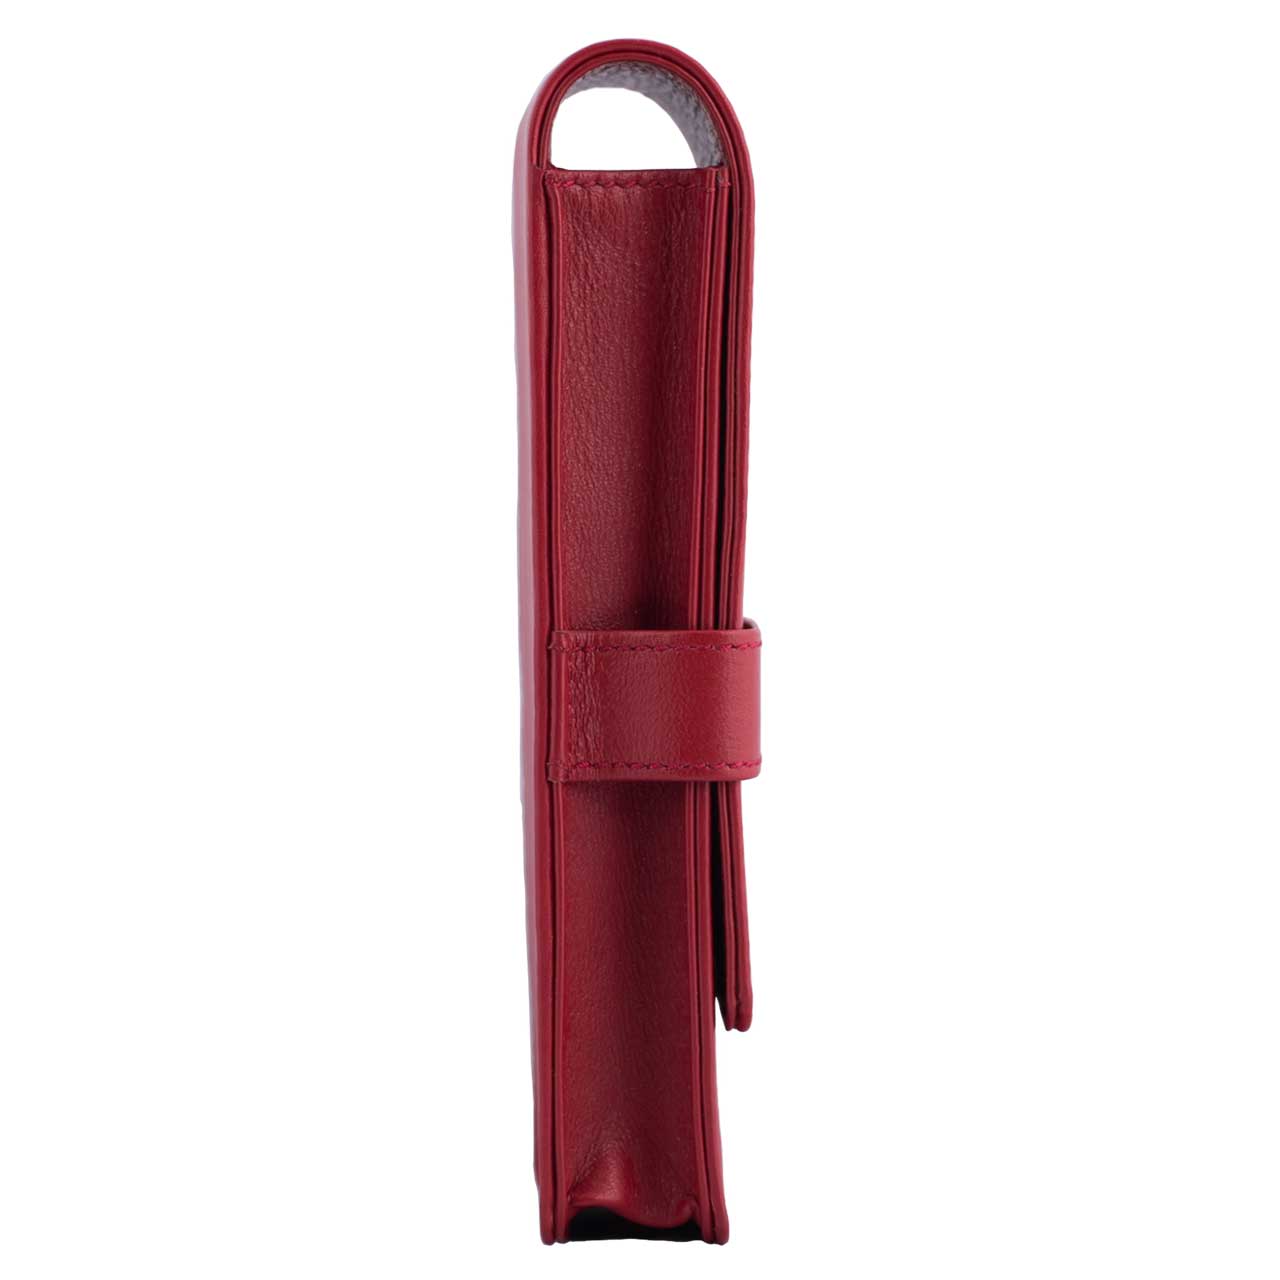 DiLoro Leather Triple Pen and Pencil Holder - Venetian Red Side 4